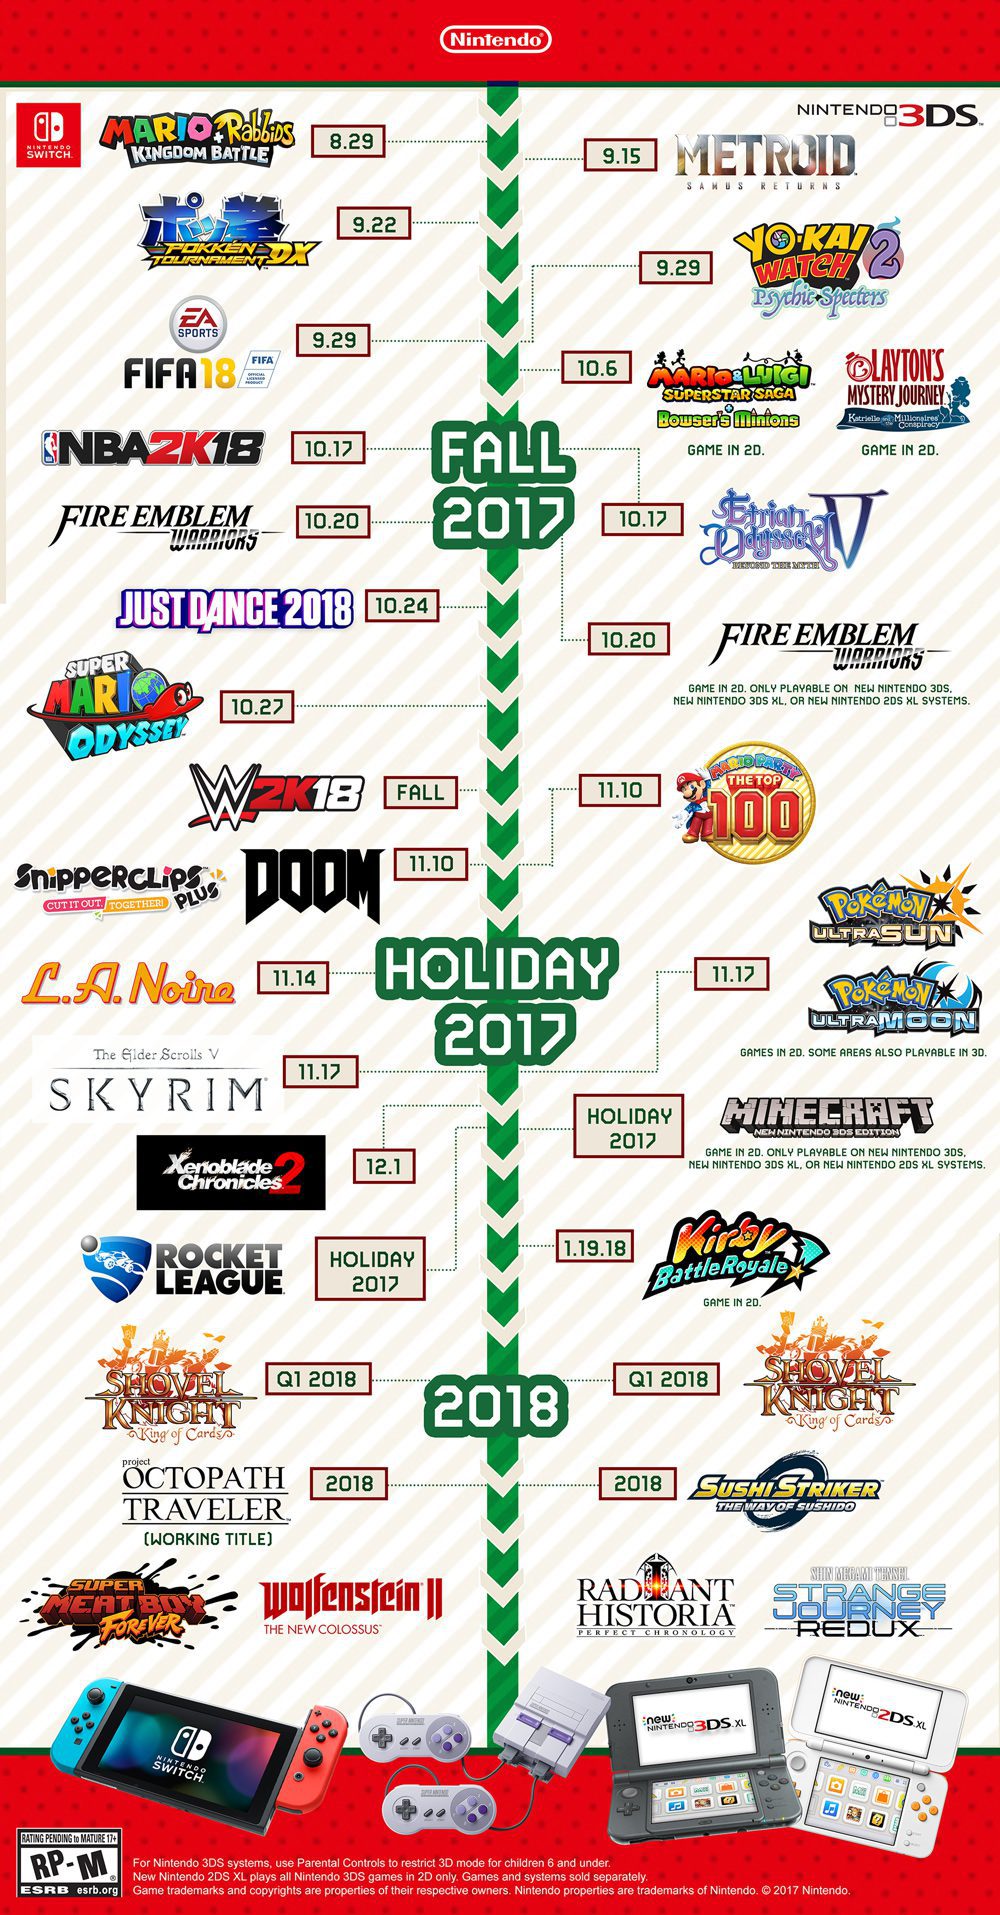 new and upcoming switch games